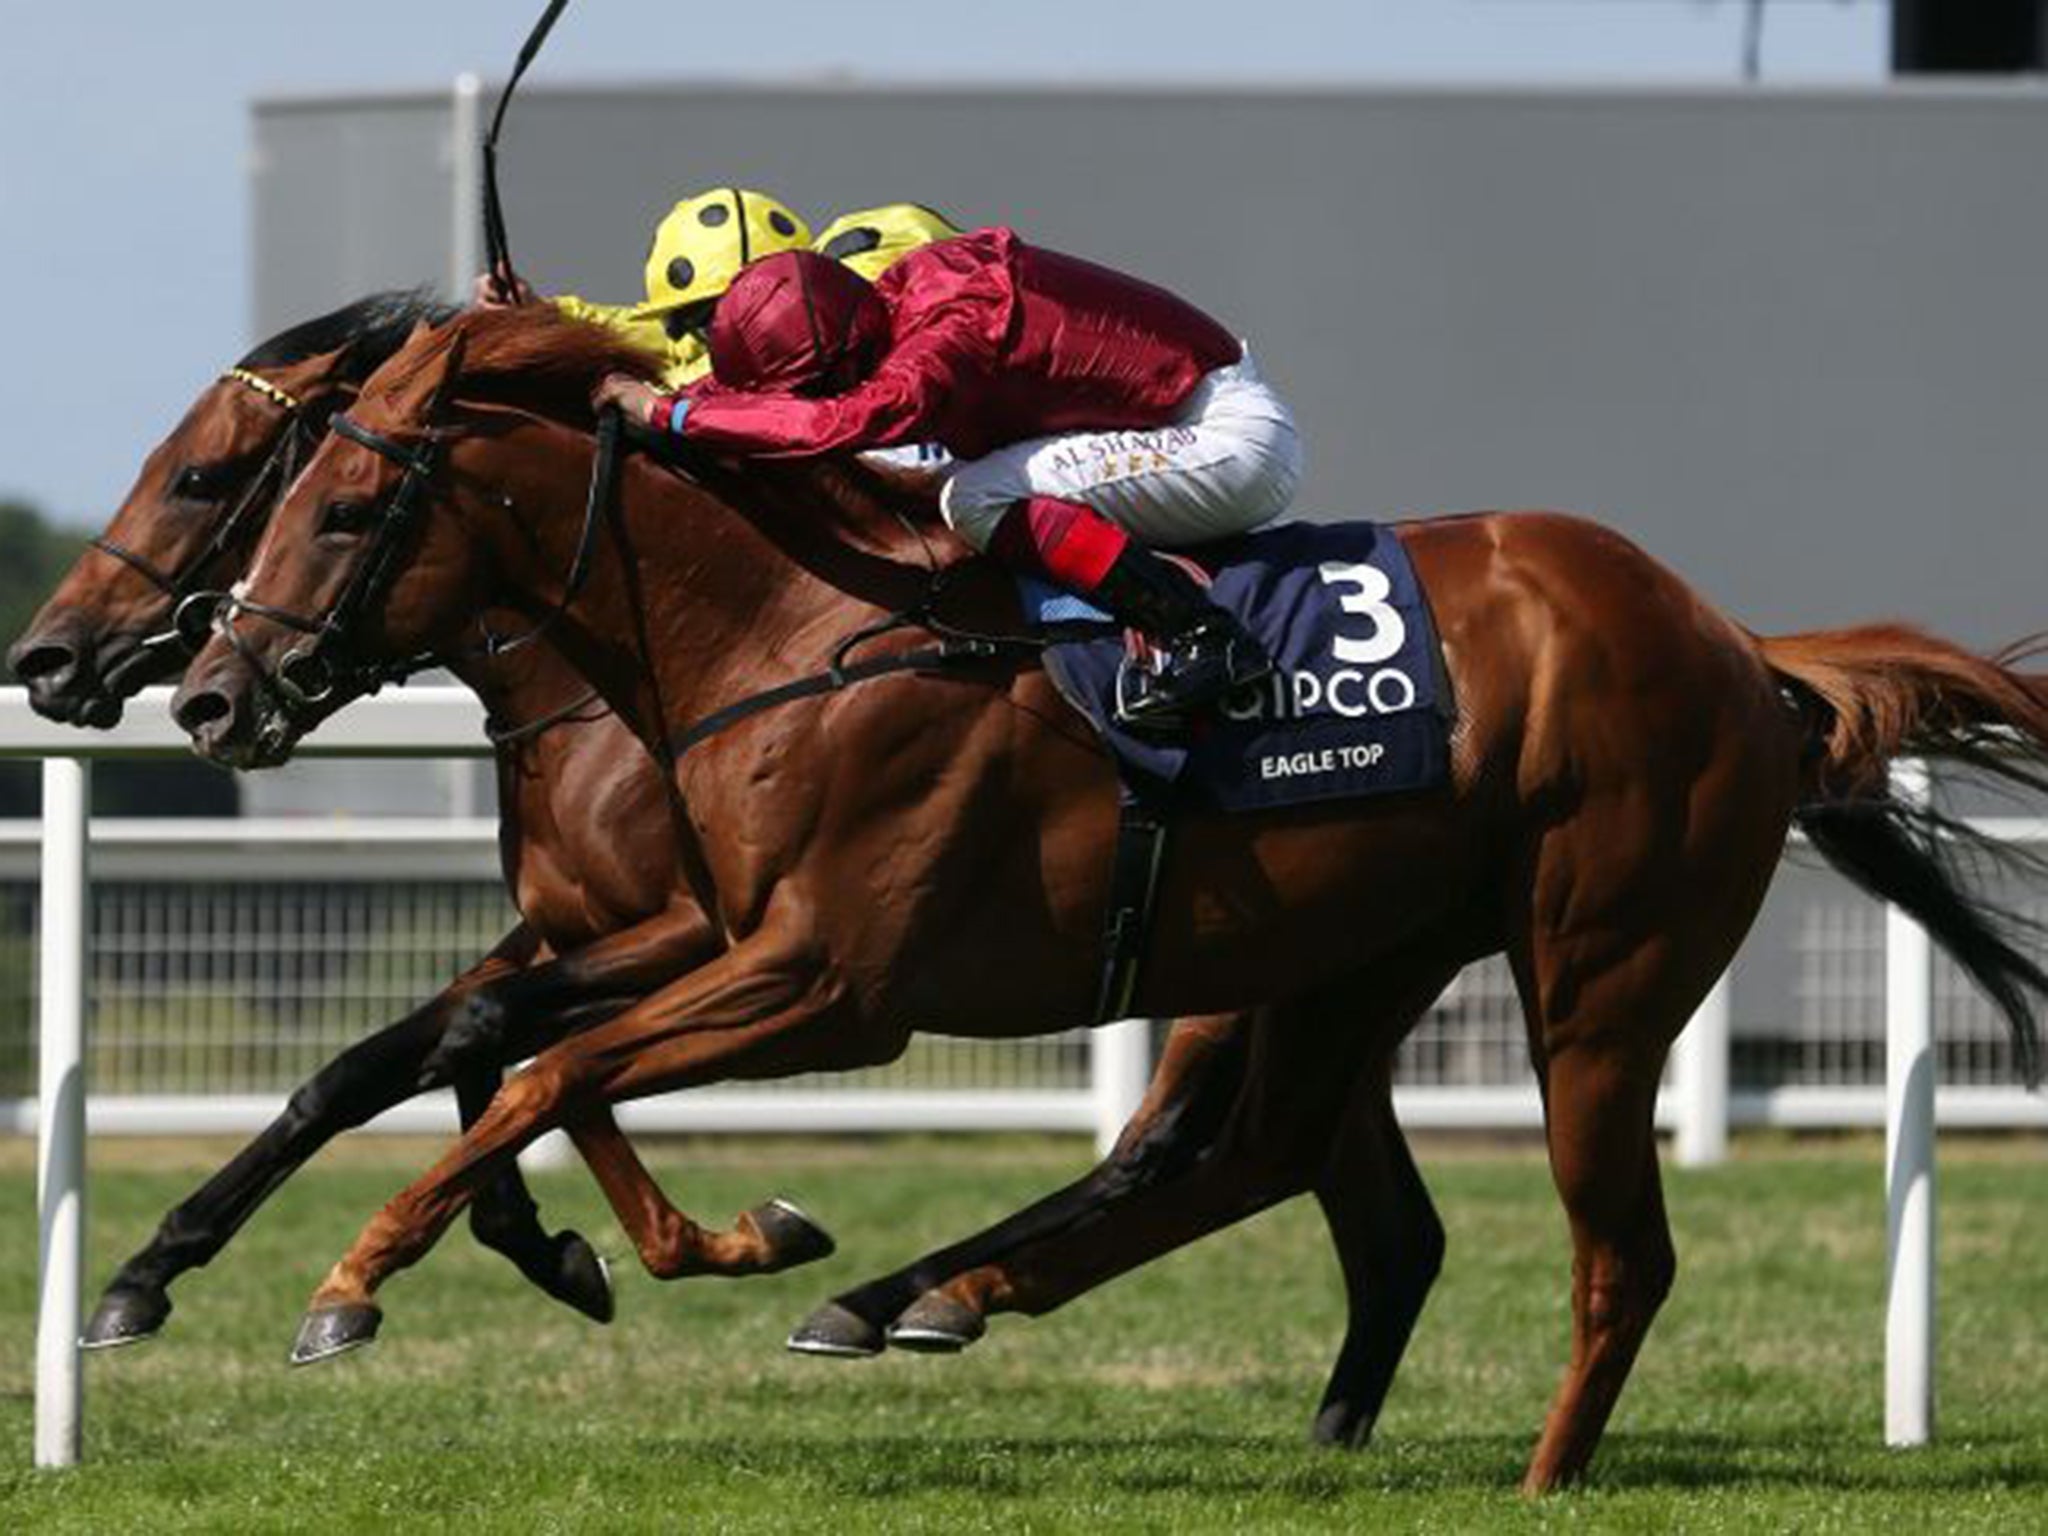 Thrilling finish: Andrea Atzeni pushes Postponed ahead of Frankie Dettori’s Eagle Top to win